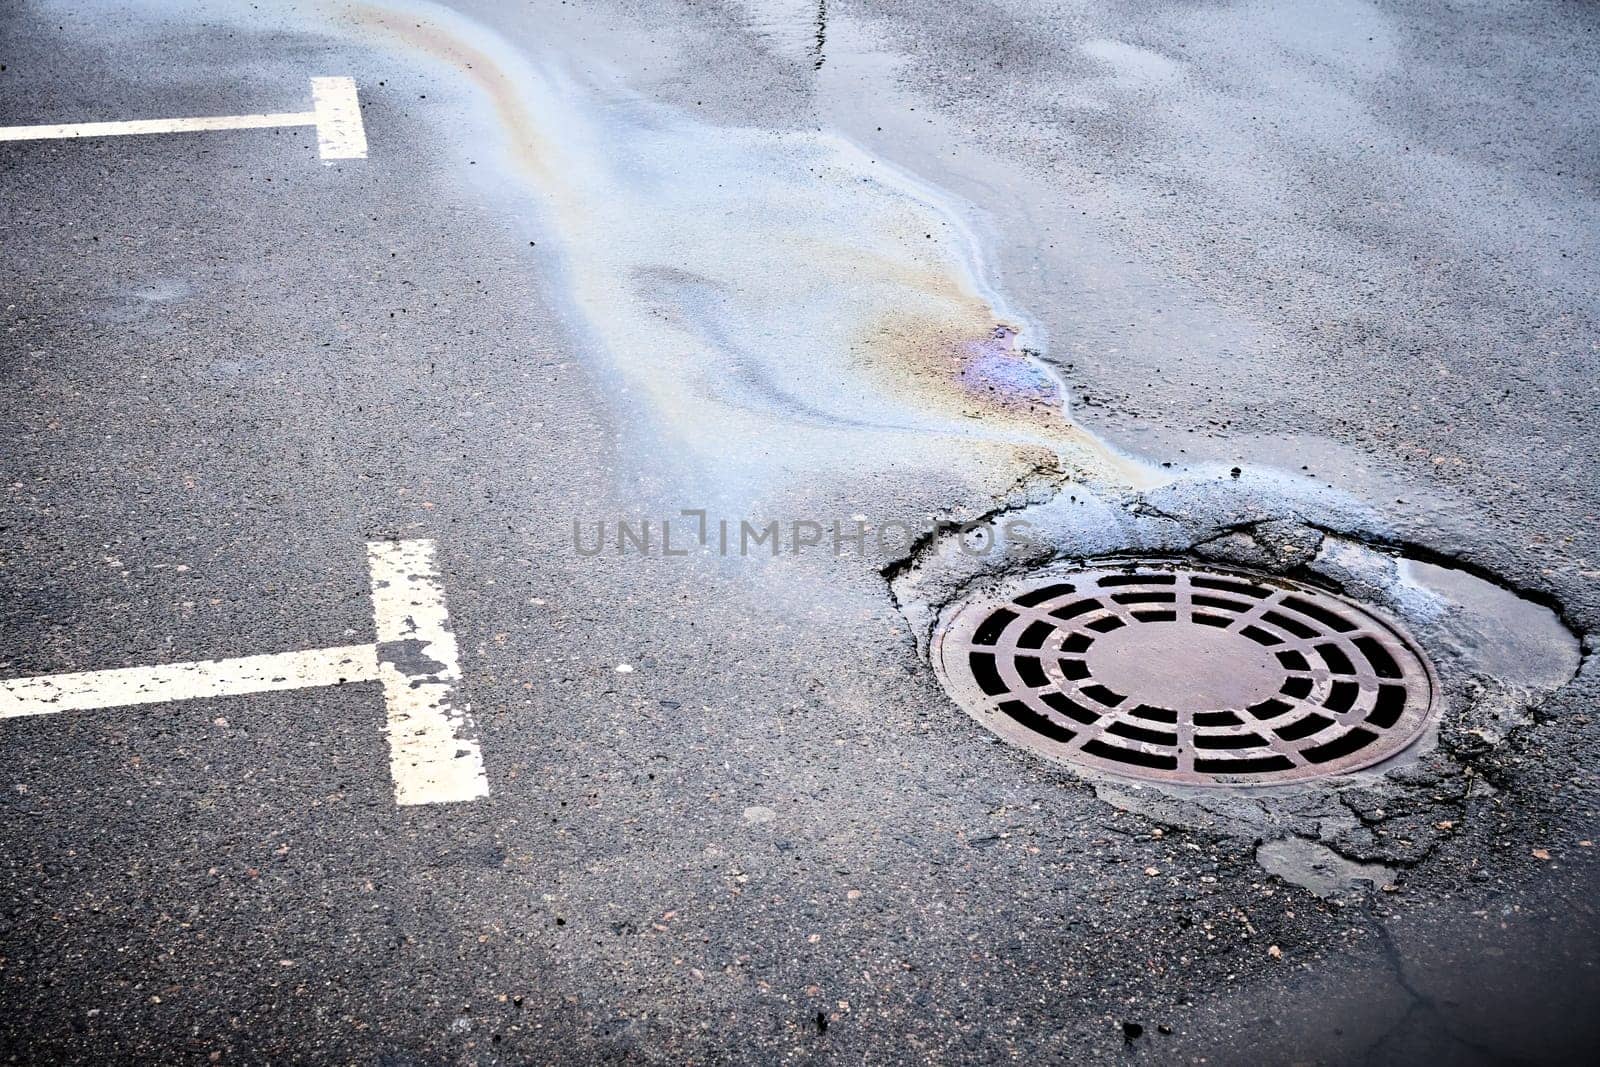 An oil slick of gasoline or oil on an asphalt road flows into a storm drain.